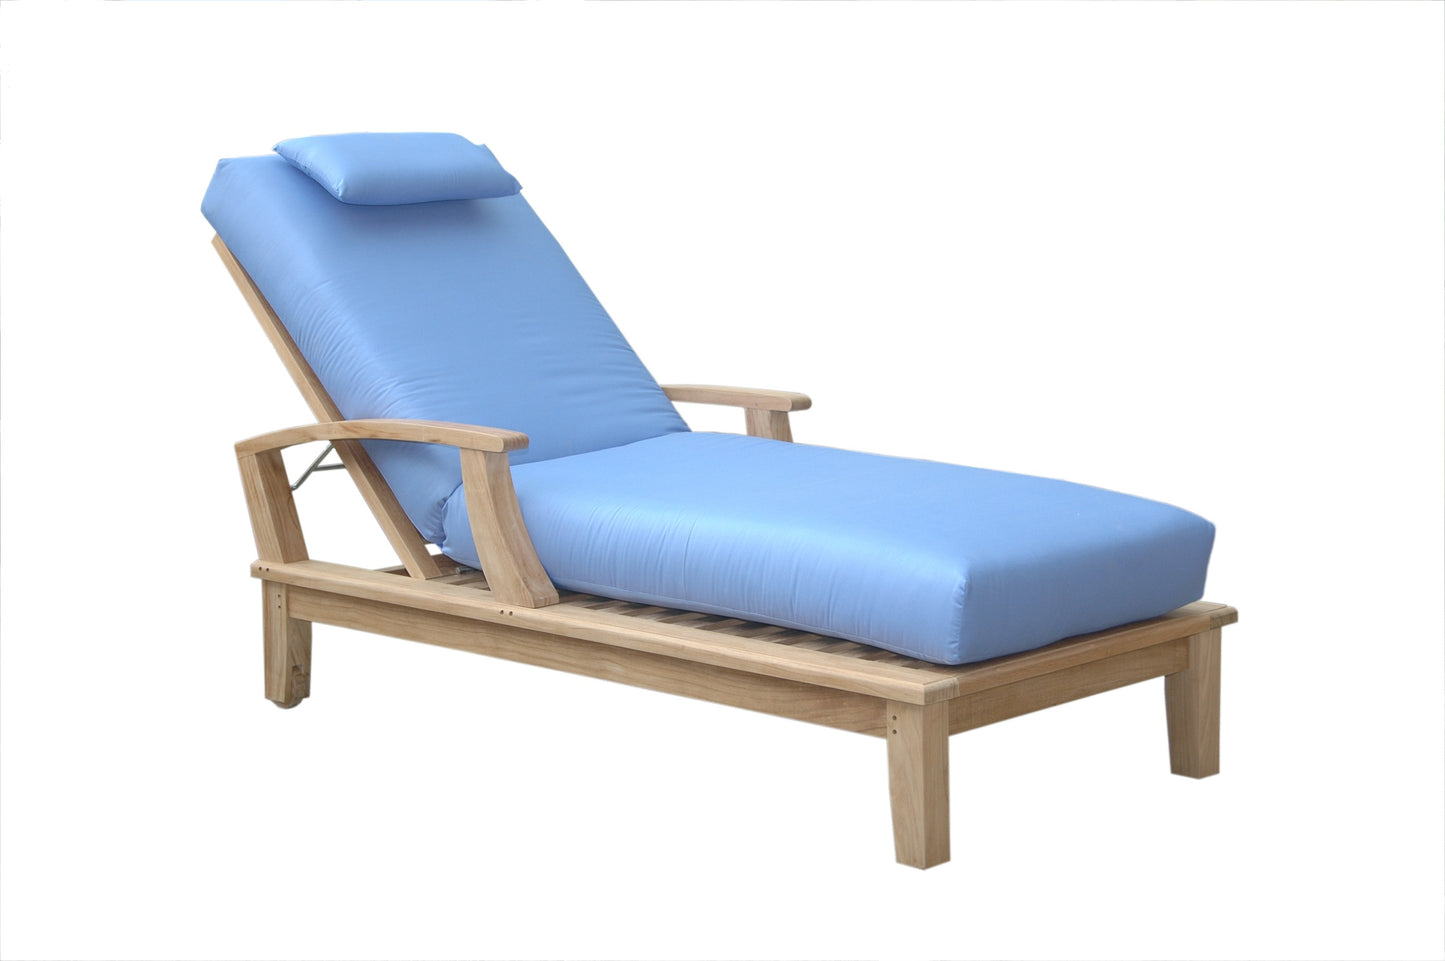 Brianna Sun Lounger with Arm - Addison Foster